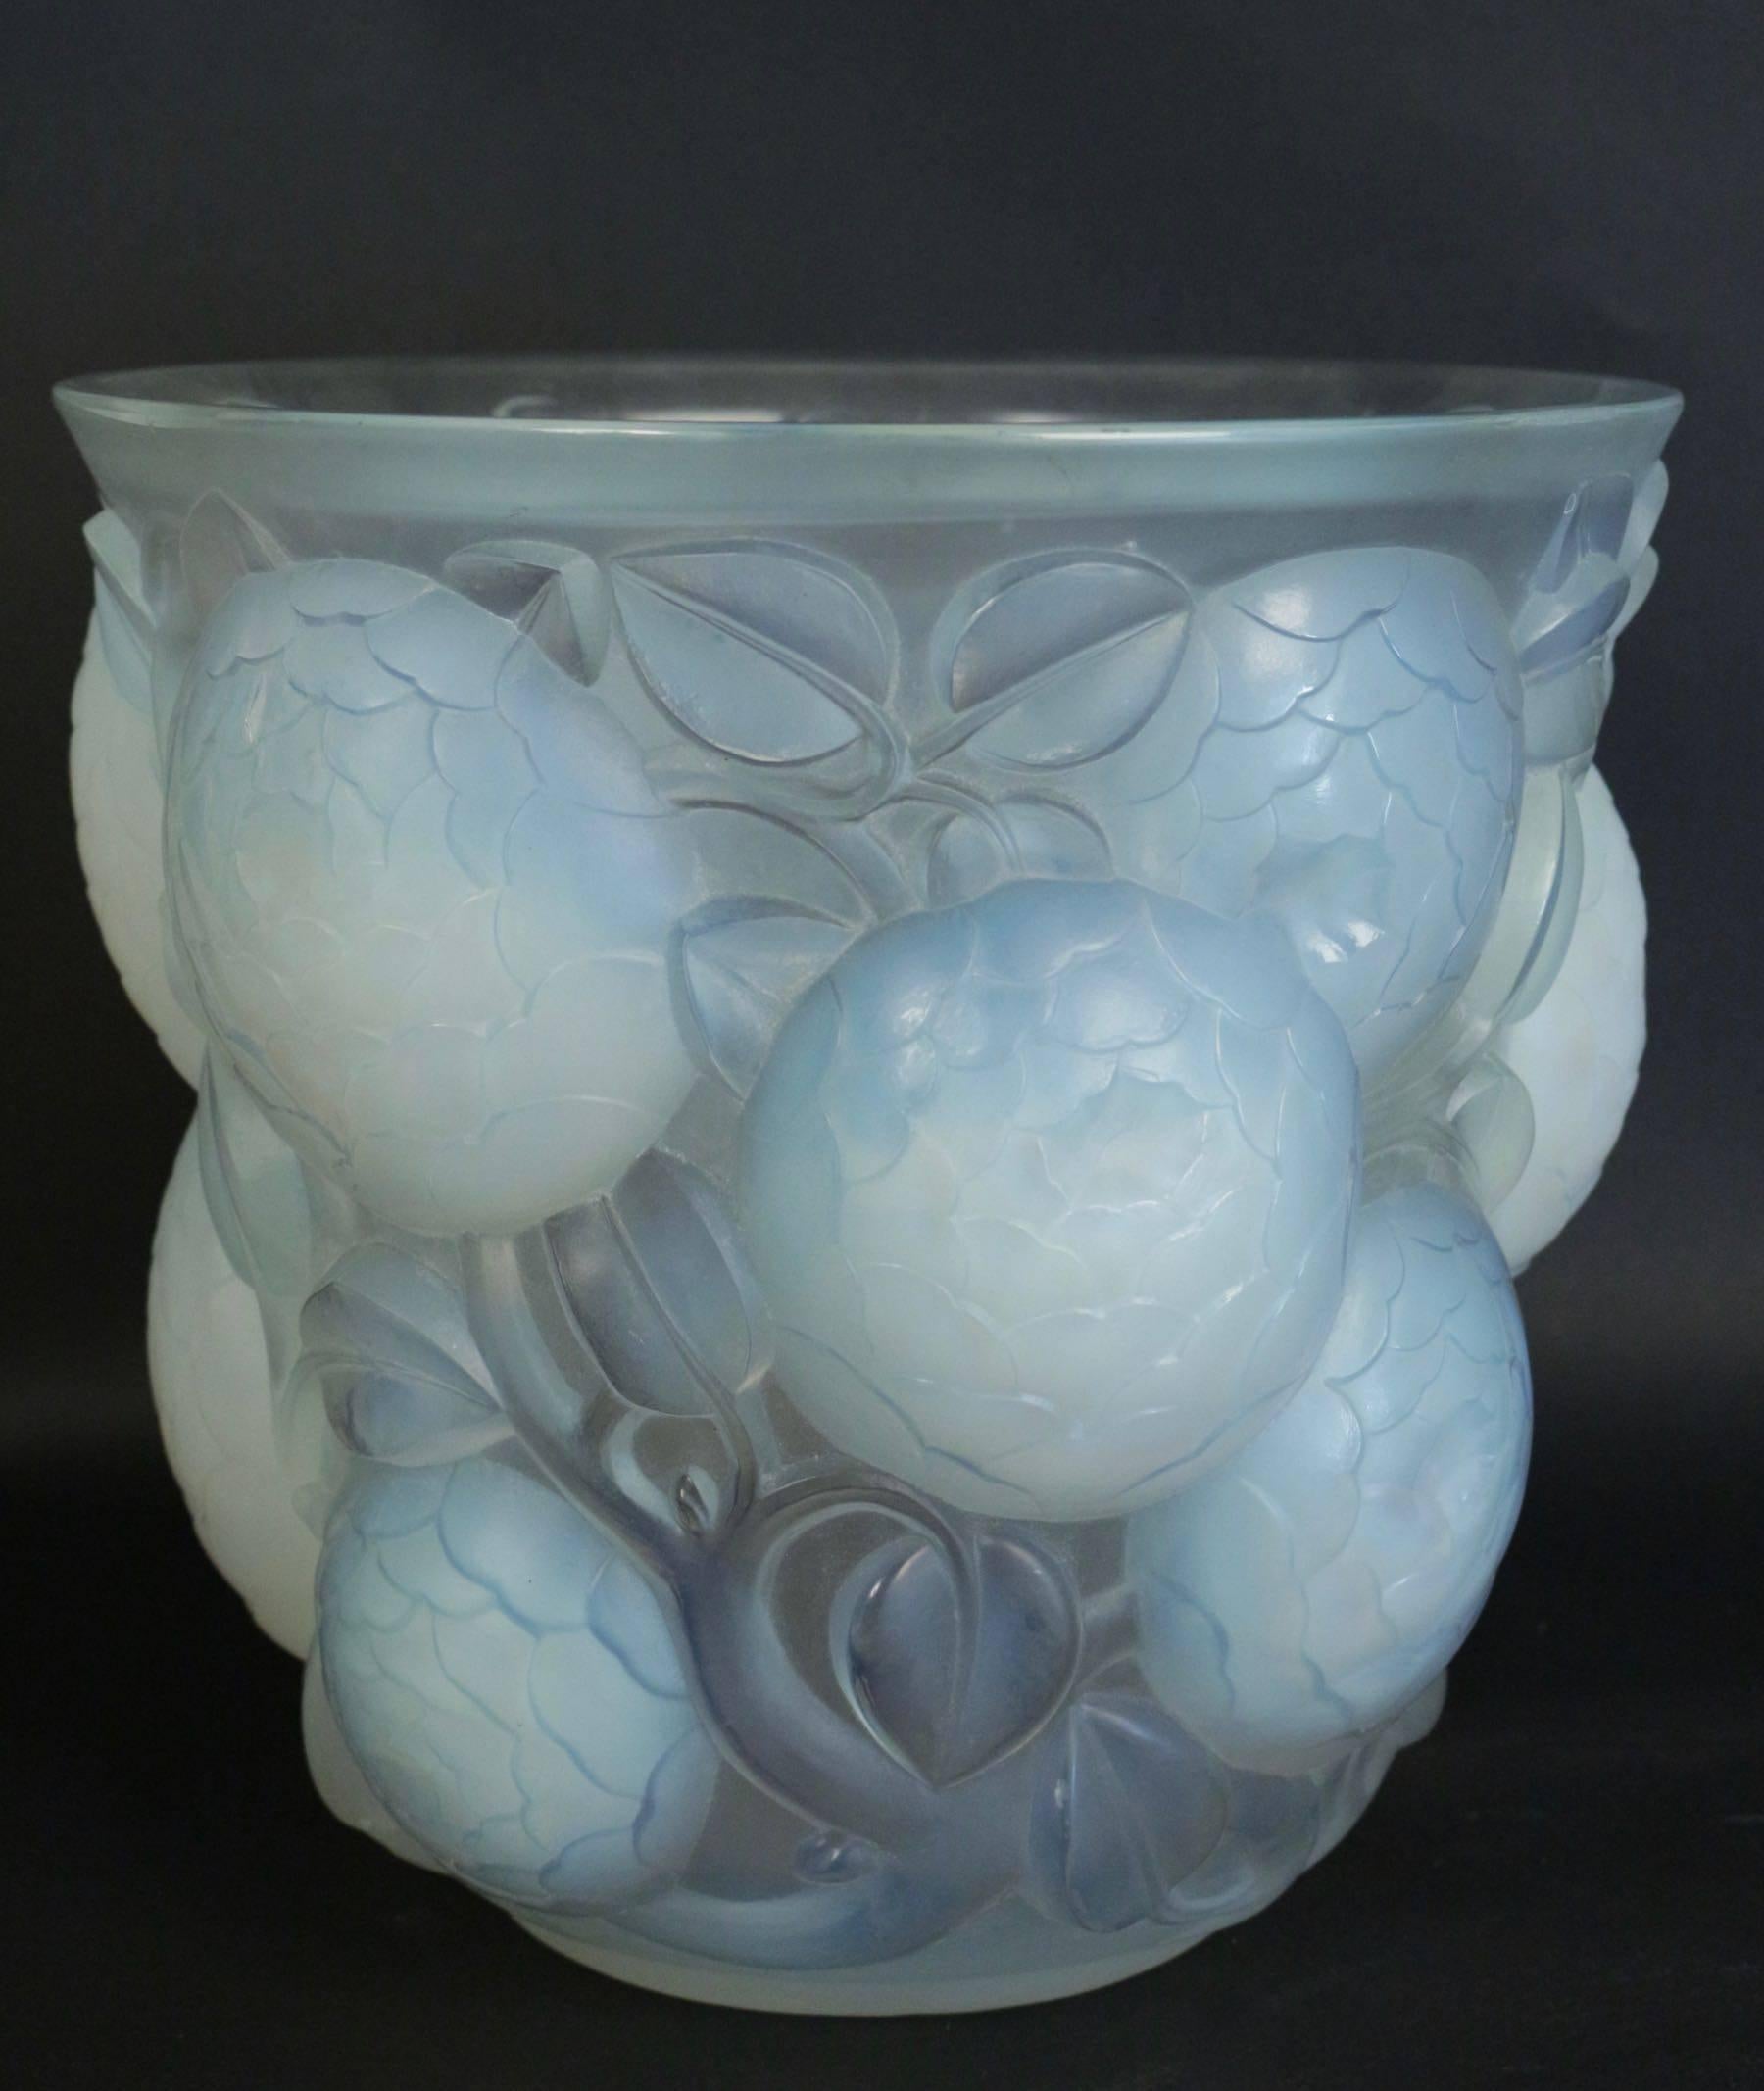 Rene Lalique Oran opalescent vase.
Model: 999, circa 1927.
Measures: Lalique vase Oran: 26.5 cm tall by 27 cm wide at the top rim frosted heavy press molded high relief large flower heads against a small leafy background R. Lalique Vase.